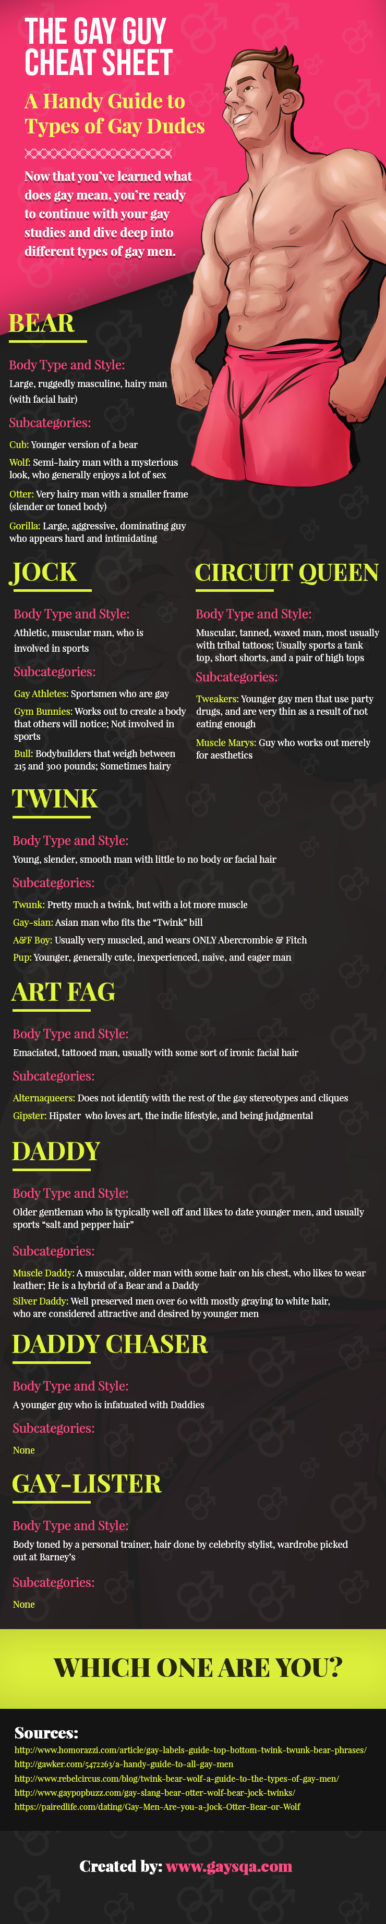 The Gay Guy Cheat Sheet: A Handy Guide to Types of Gay Dudes